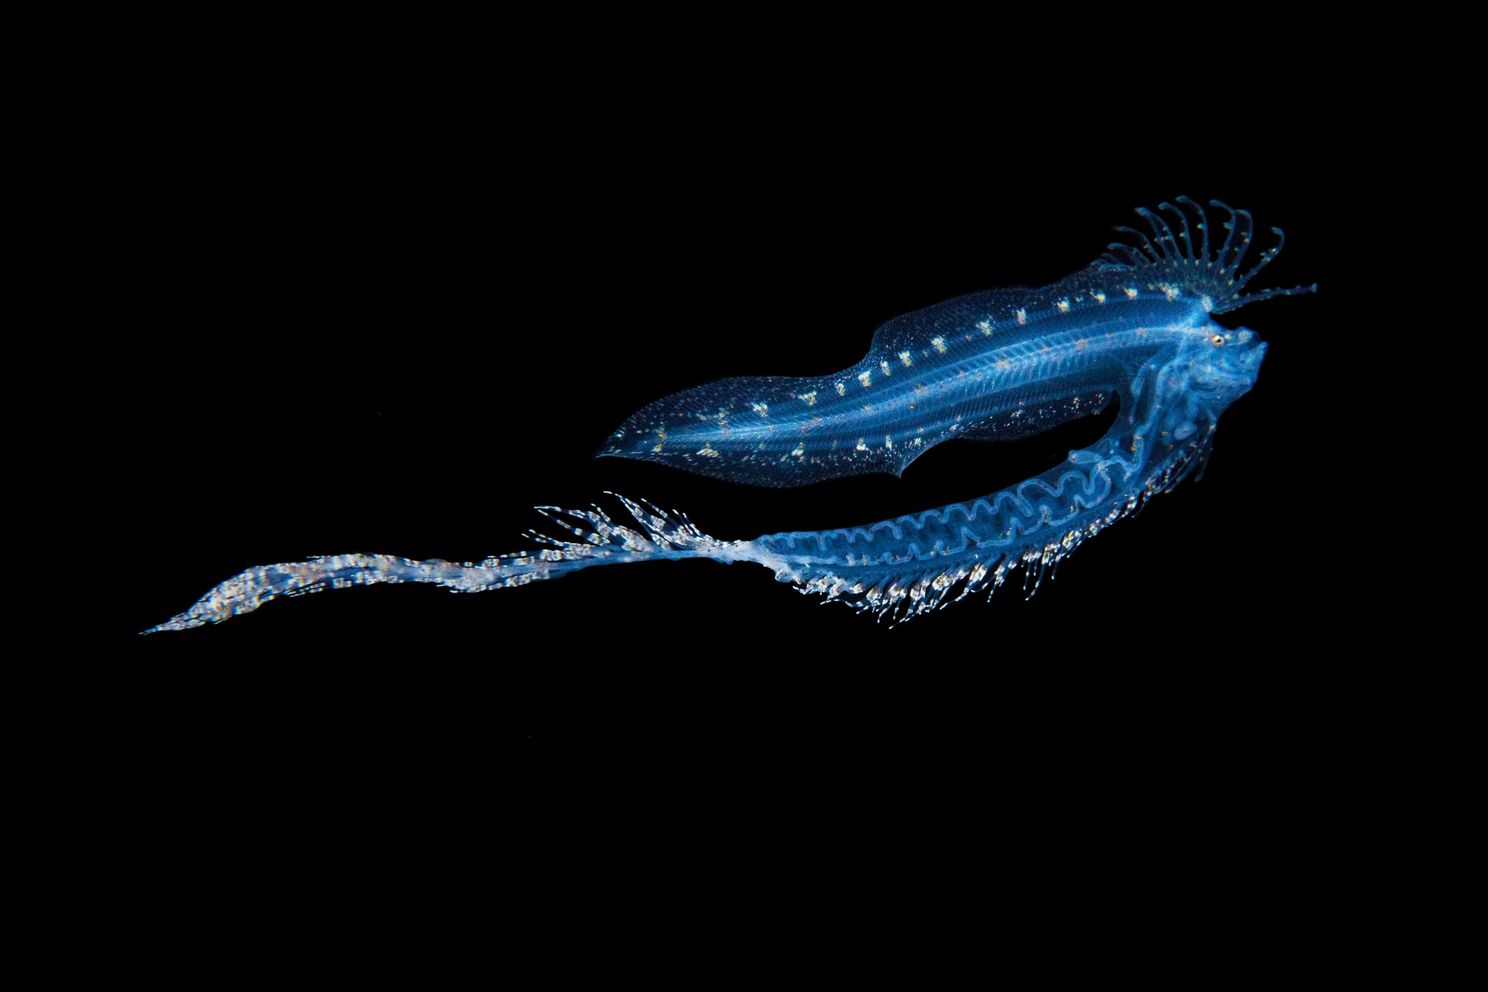 a side view of a larval cusk eel with a long protruding gut